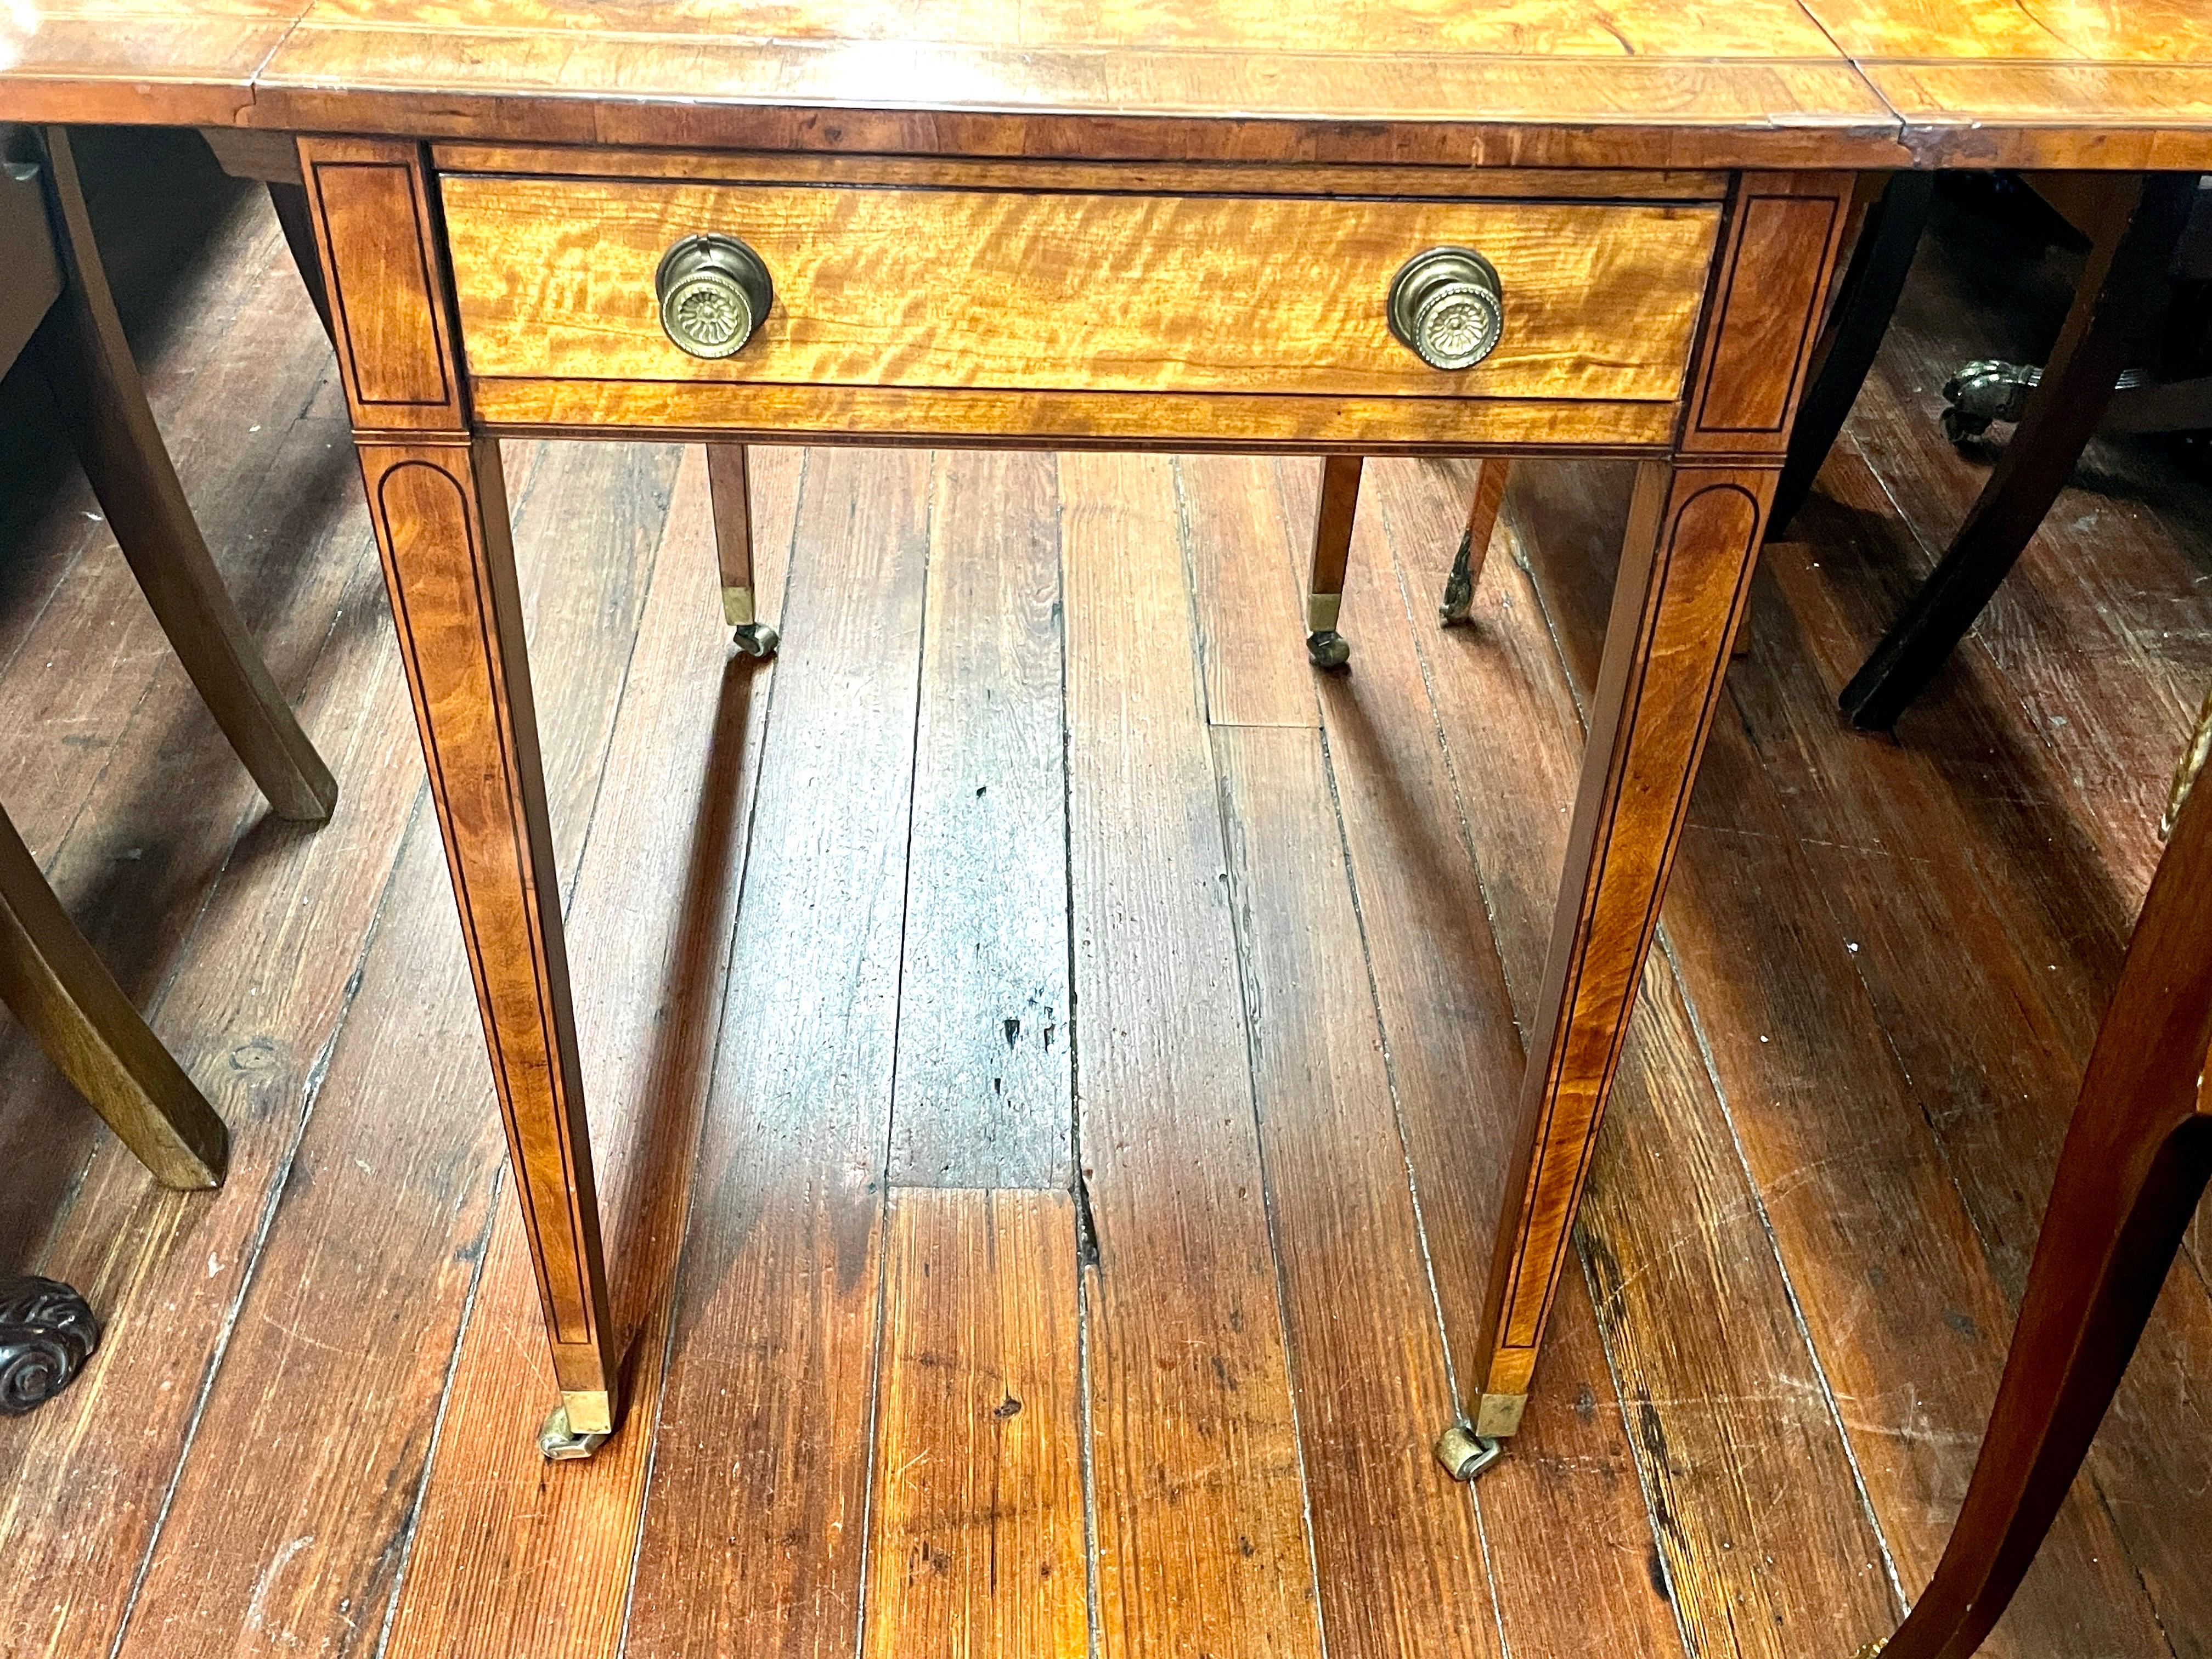 Rare Antique English Geo. III Regency Inlaid Satinwood Drop-Leaf Pembroke Table In Good Condition For Sale In Charleston, SC